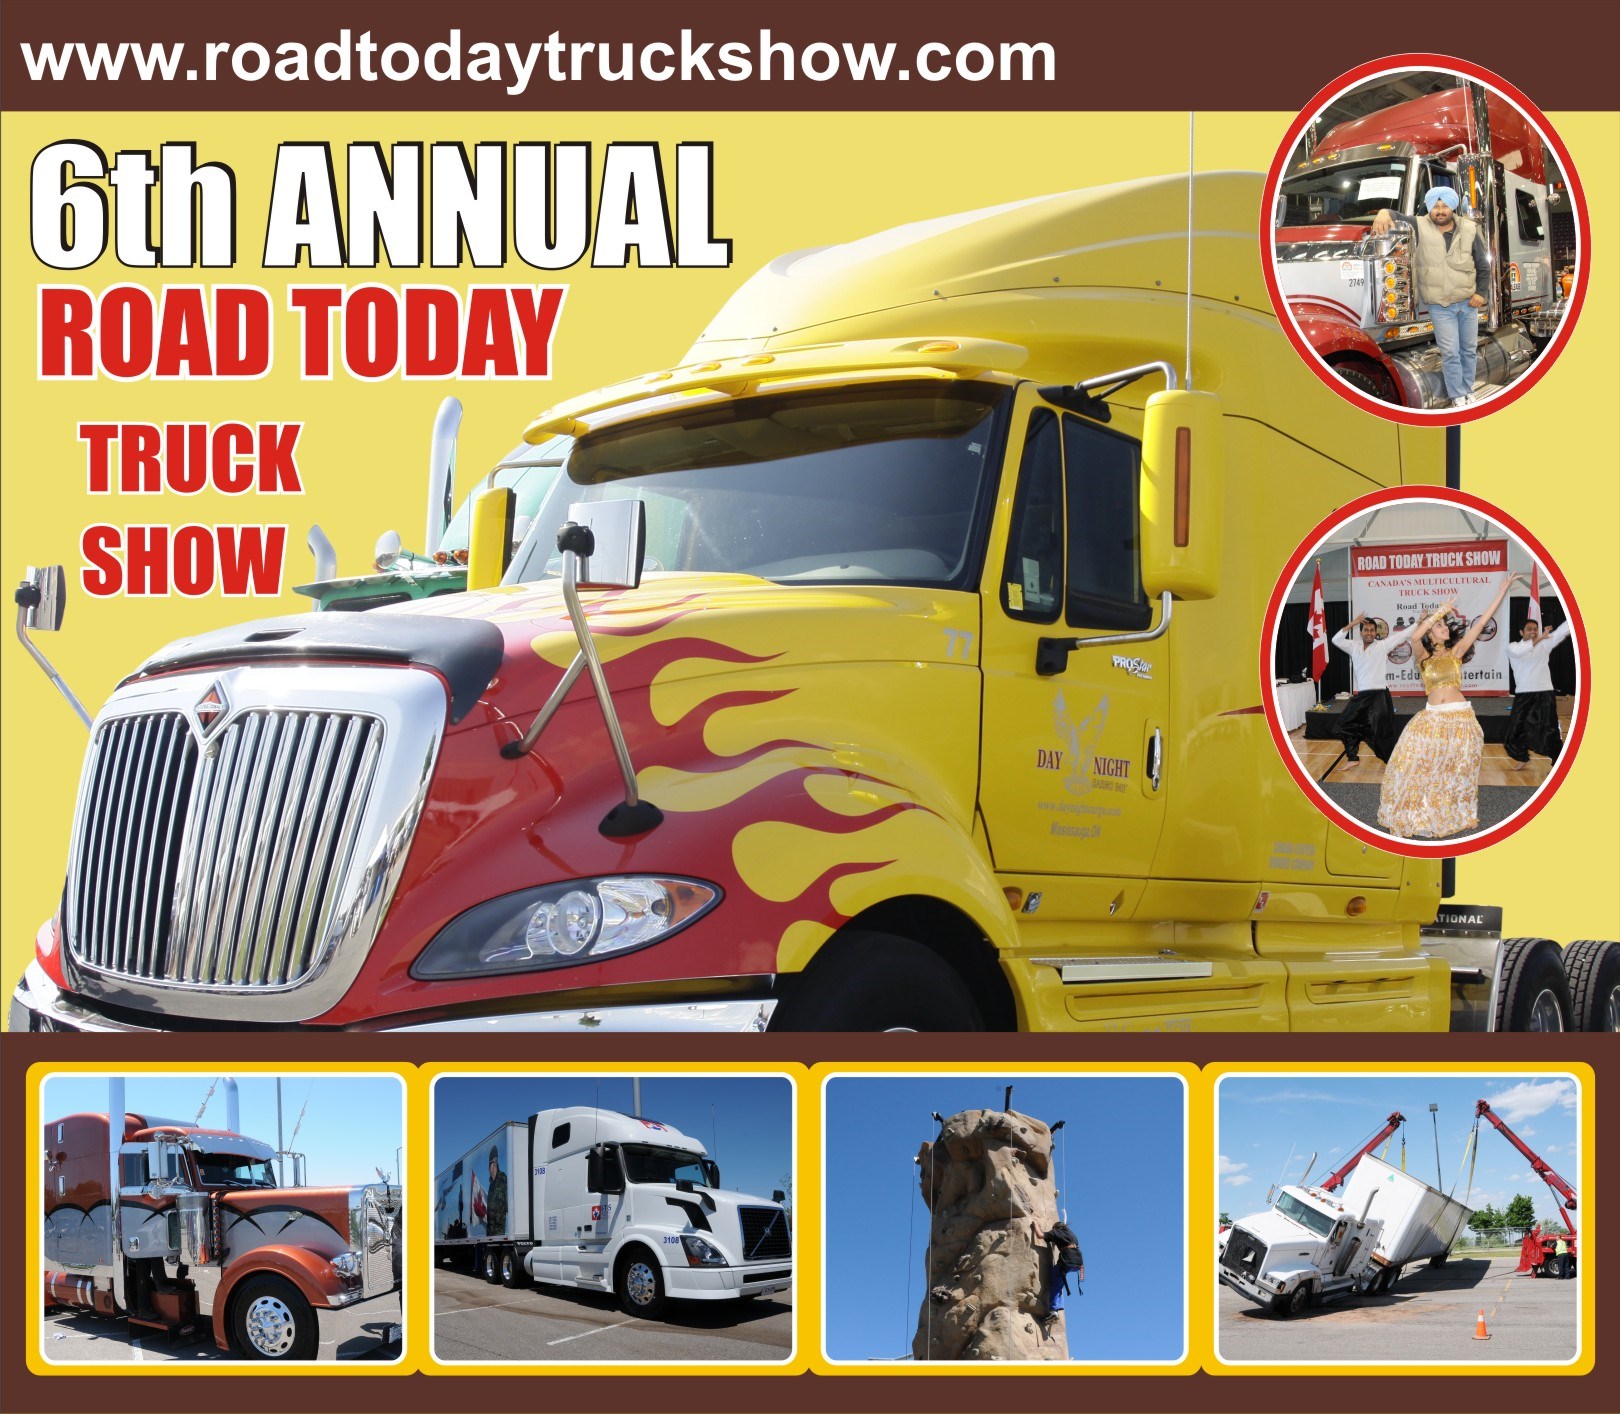 6th Annual Road Today Truck Show rolls into Soccer Centre, Brampton on May 24-25